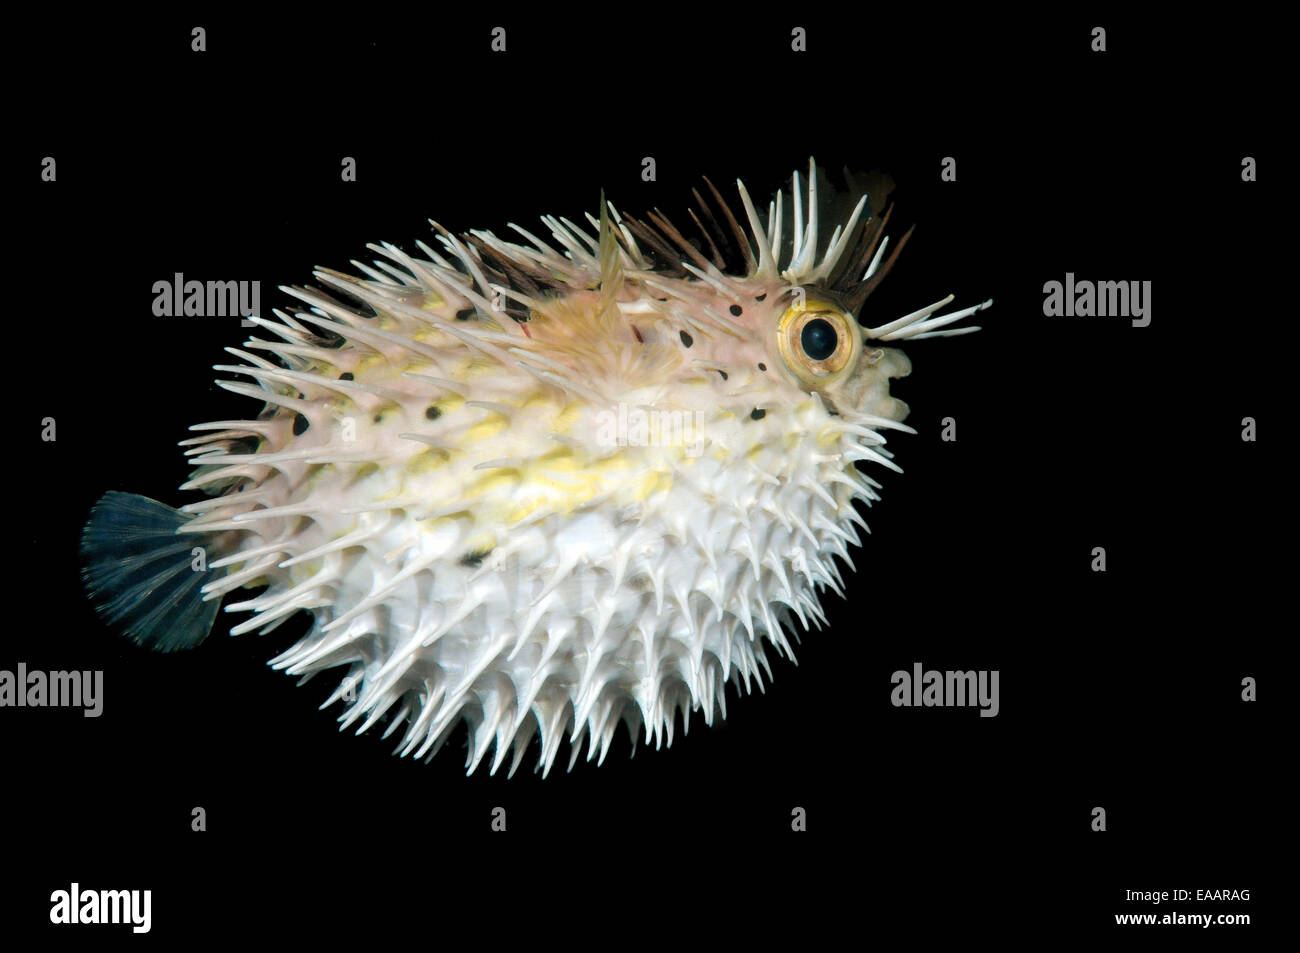 Long-spine porcupinefish, longspined porcupinefish or freckled porcupinefish (Diodon holocanthus) Bohol Sea, Philippines Stock Photo